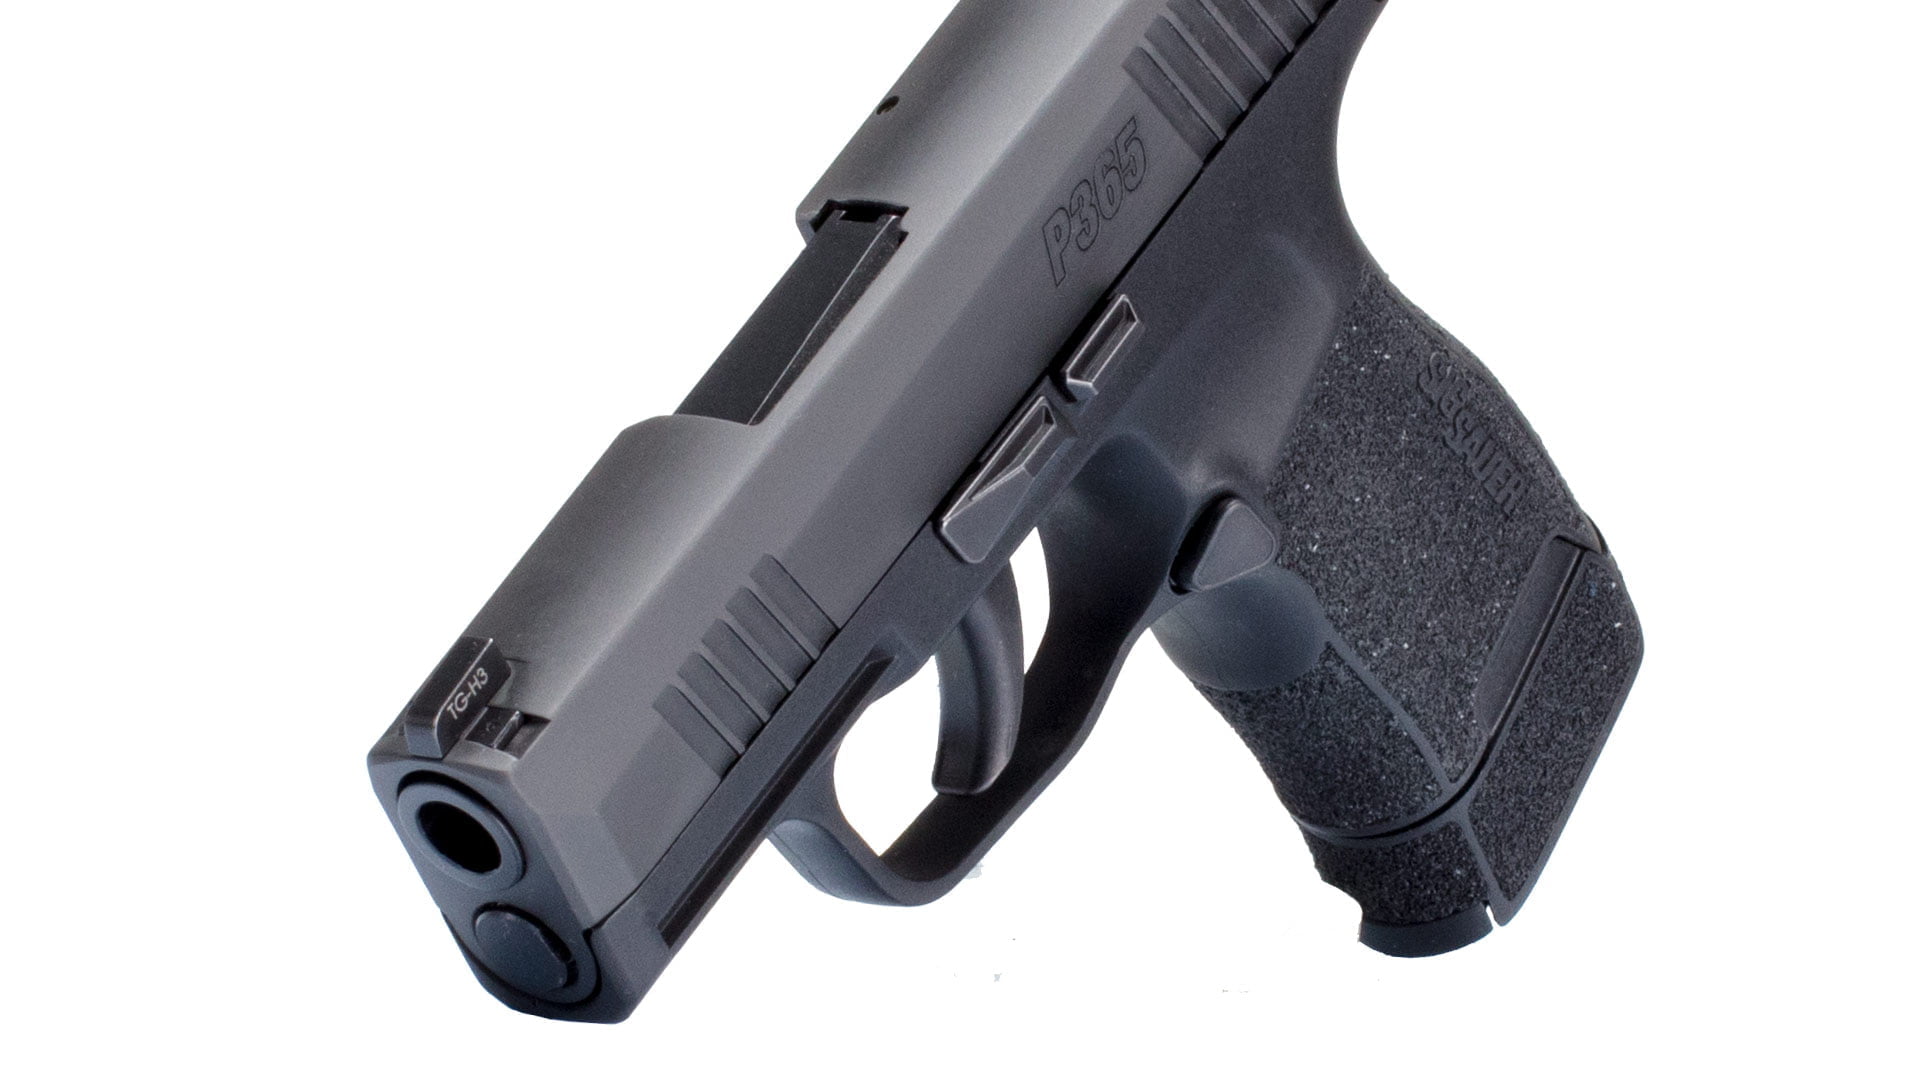 Sig Sauer P365 Nitron, a great EDC and the undisputed best concealed carry pistol of 2020.